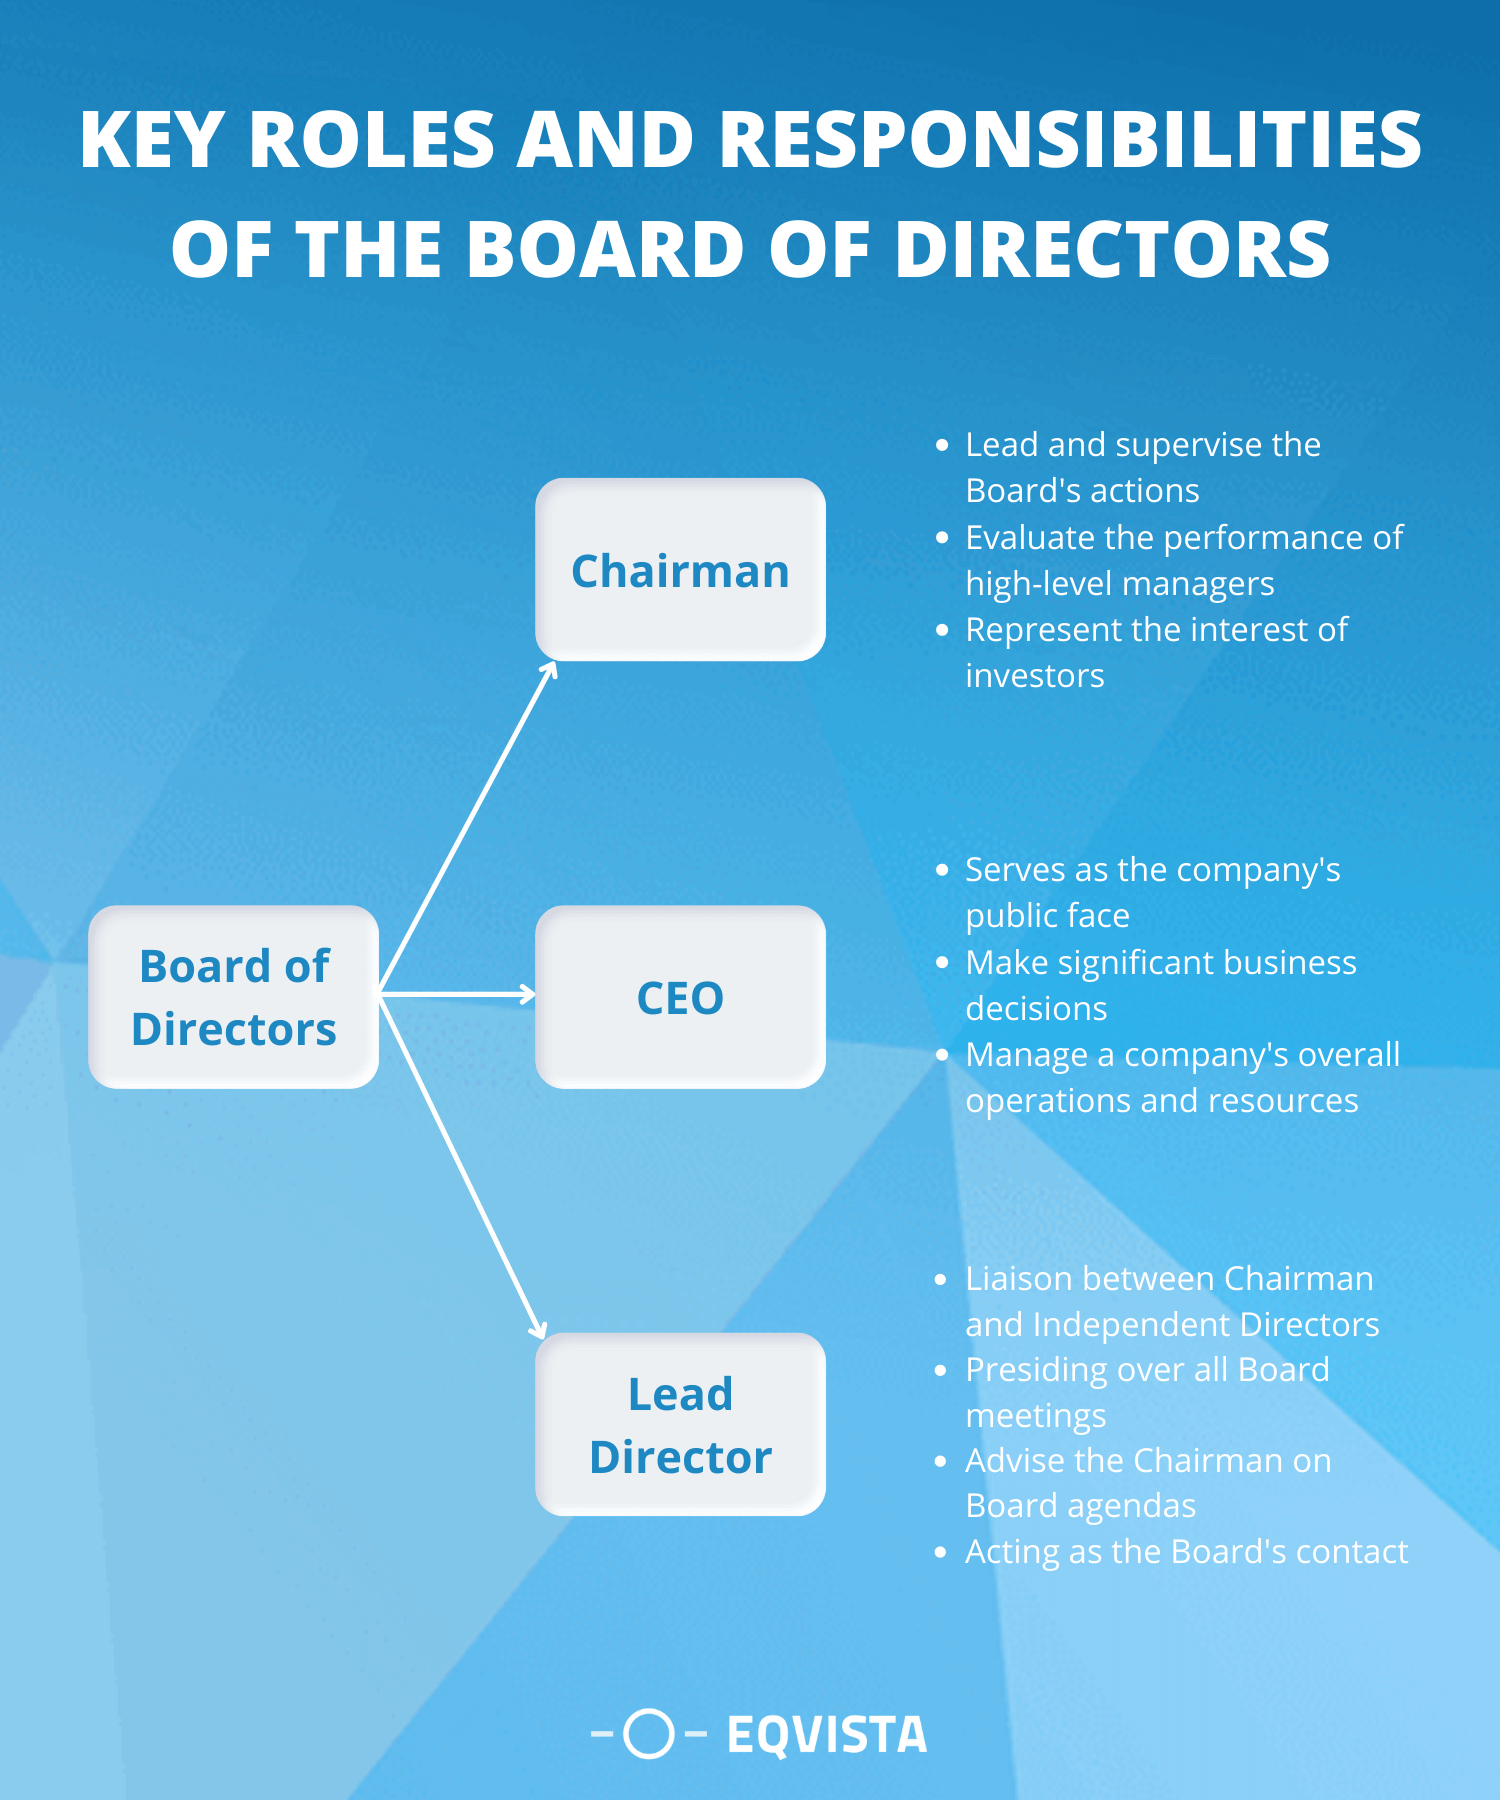 Key Roles and Responsibilities in a Board of Directors